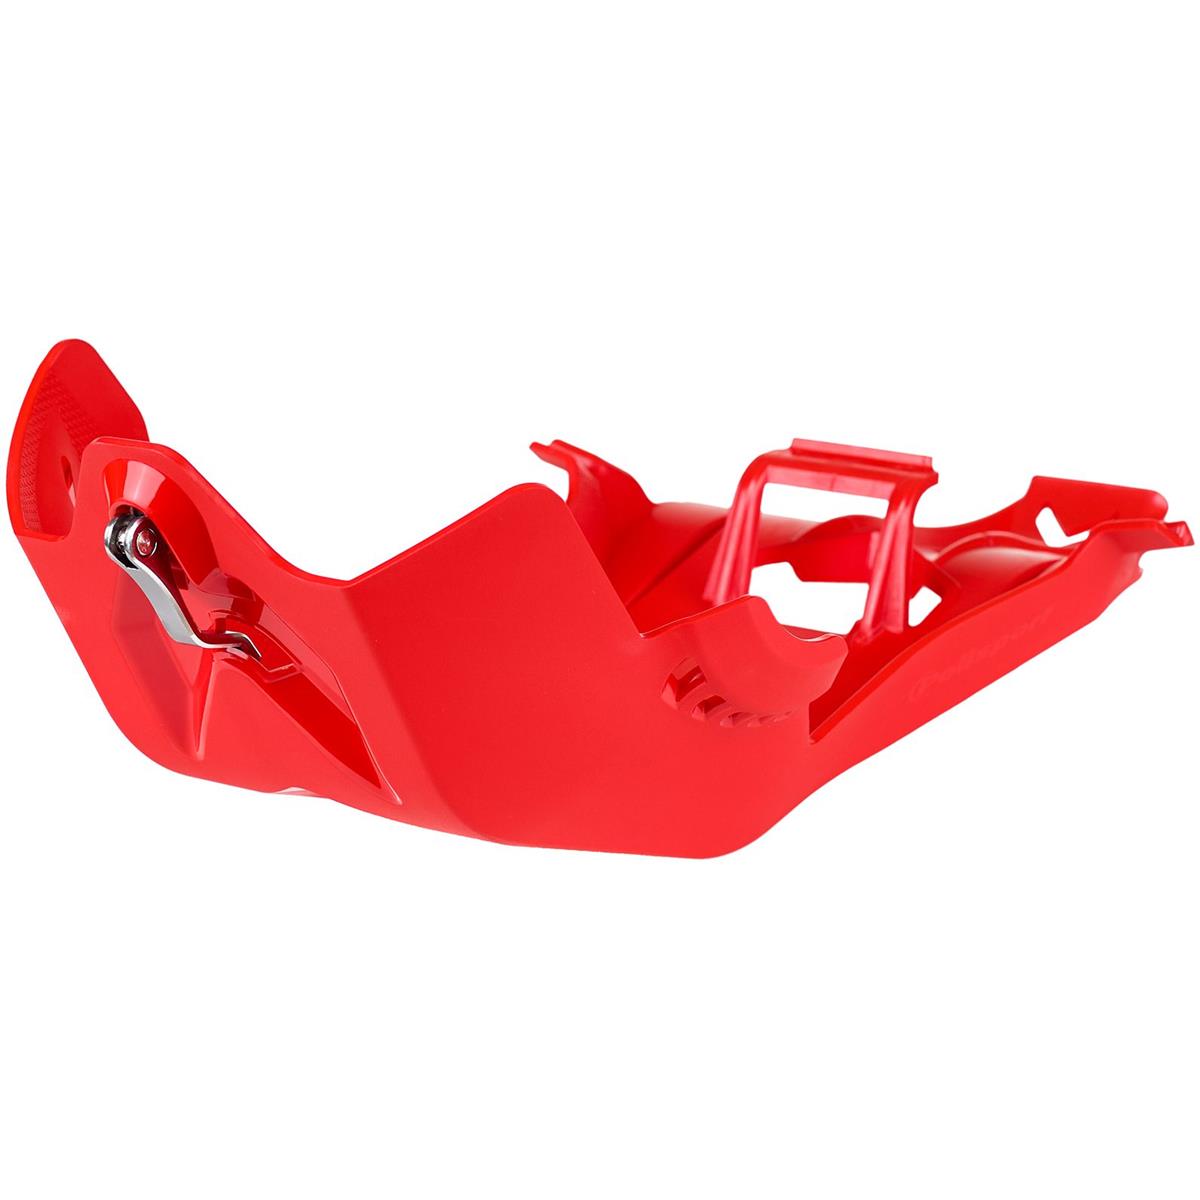 Polisport Skid plate with deflection protection Fortress Beta RR 4T 20-, Red